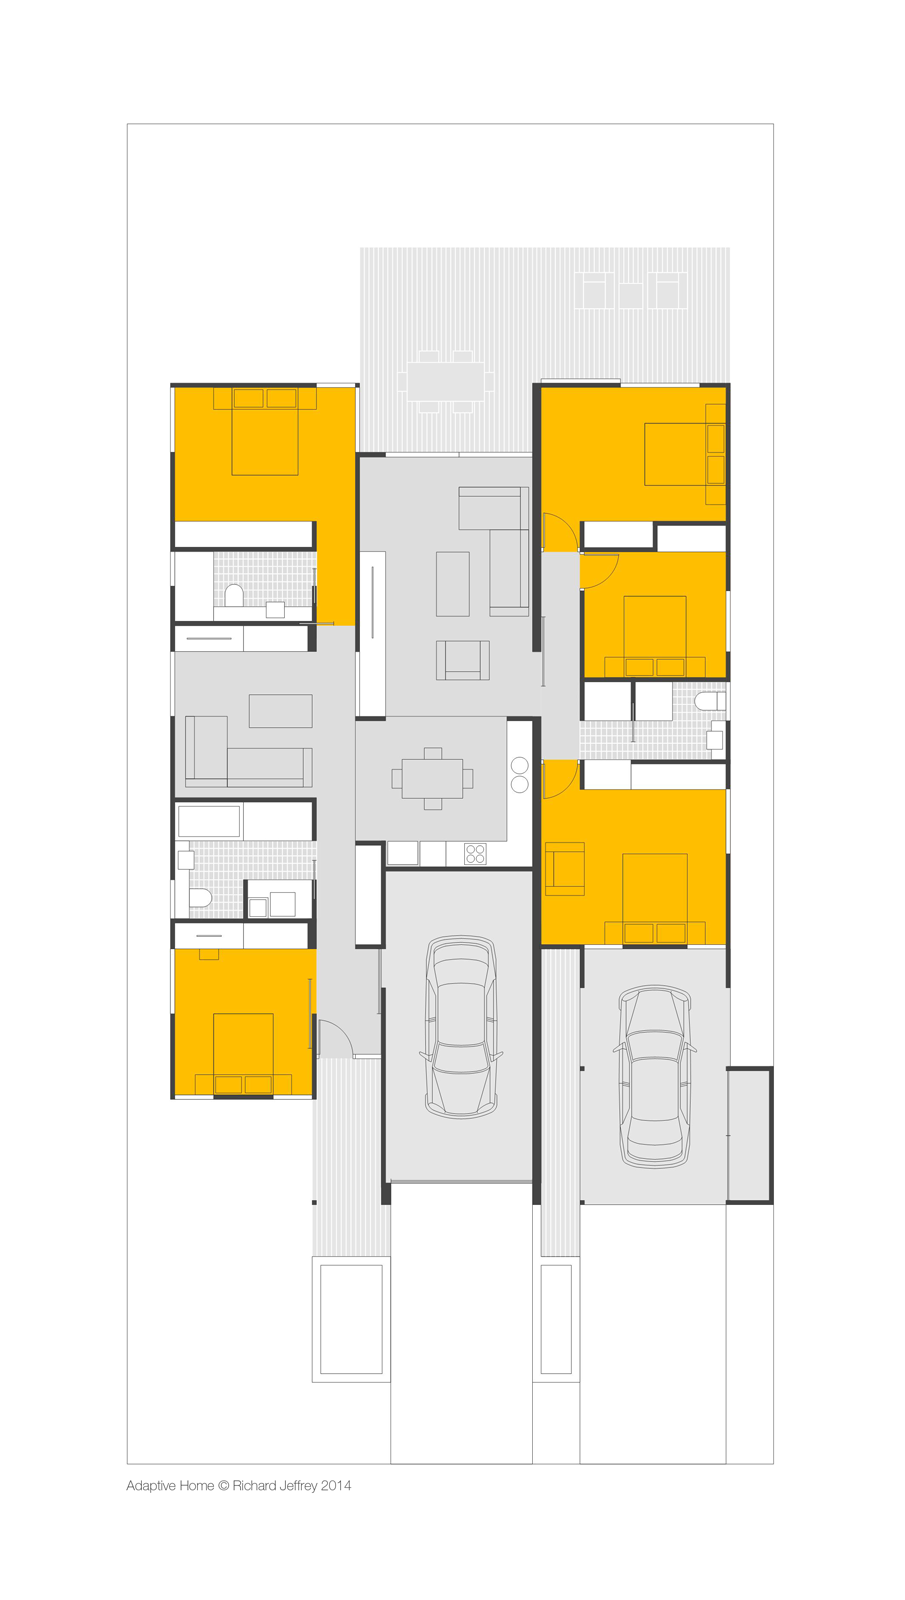 Combined to 5 bedroom plus 2 living areas